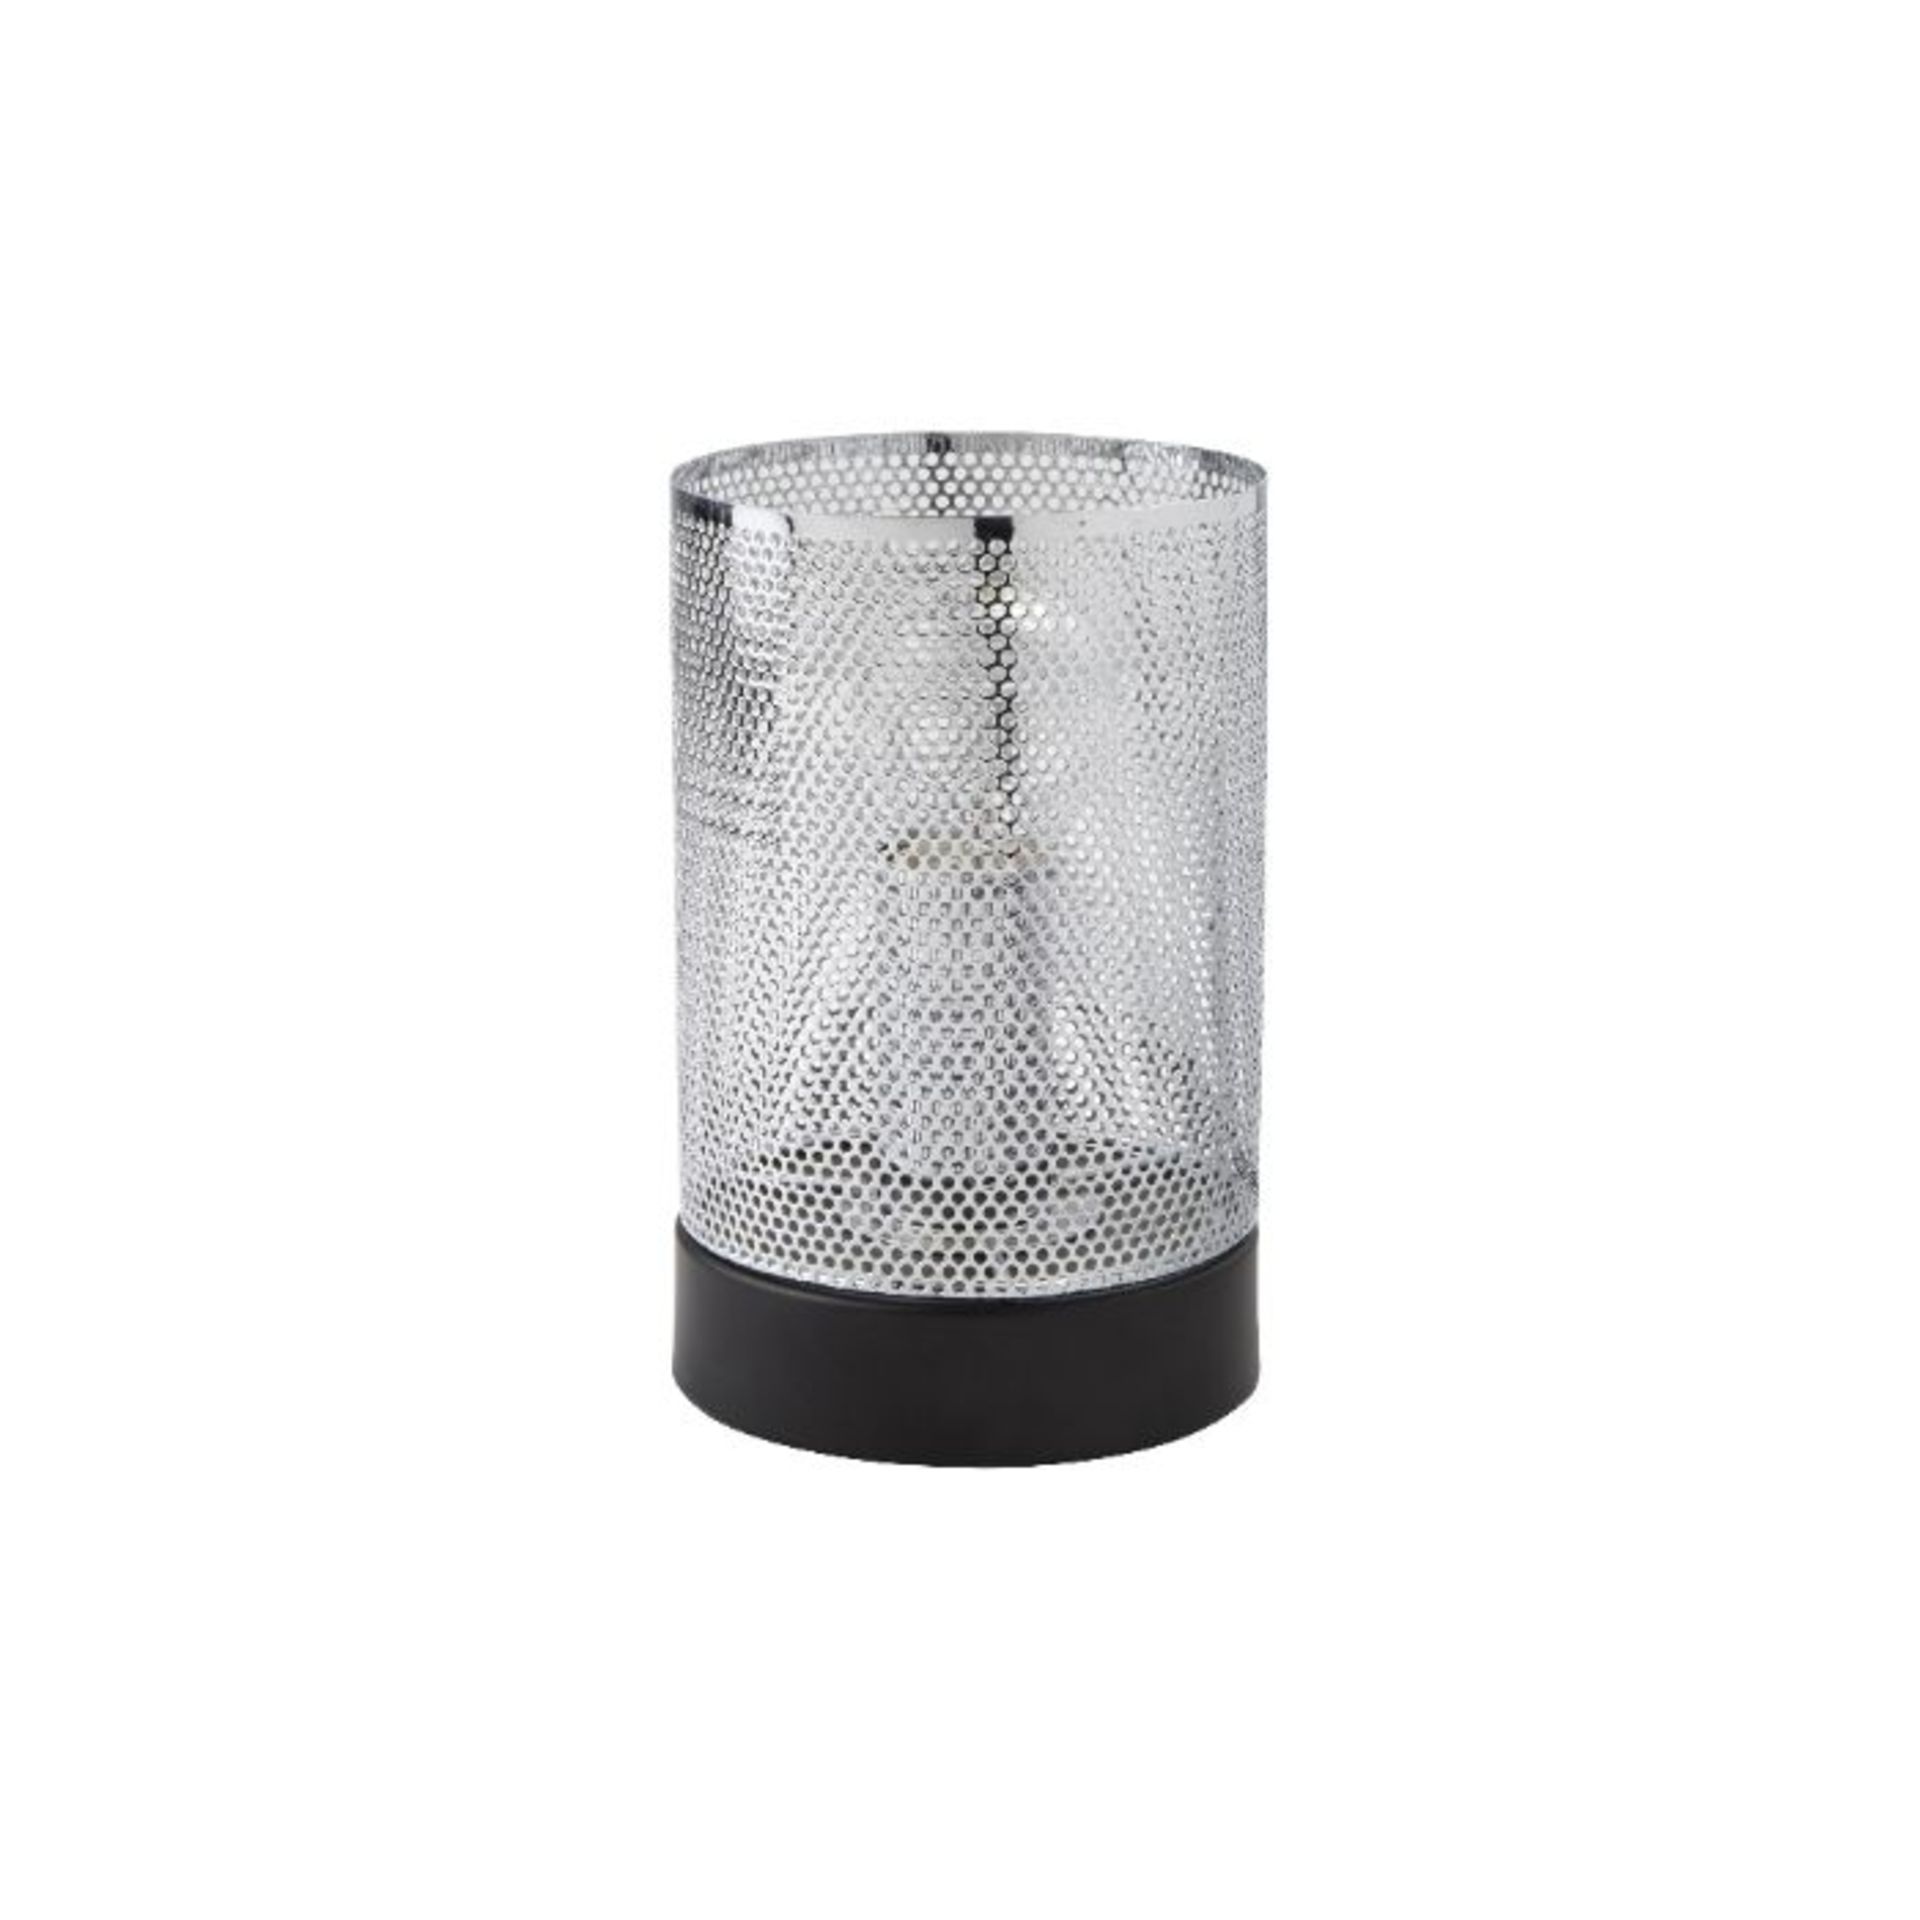 BRAND NEW CHROME MESH TABLE LAMP WITH BLACK BASE, 15.5CM HIGH, 7W - Modern design table lamp with